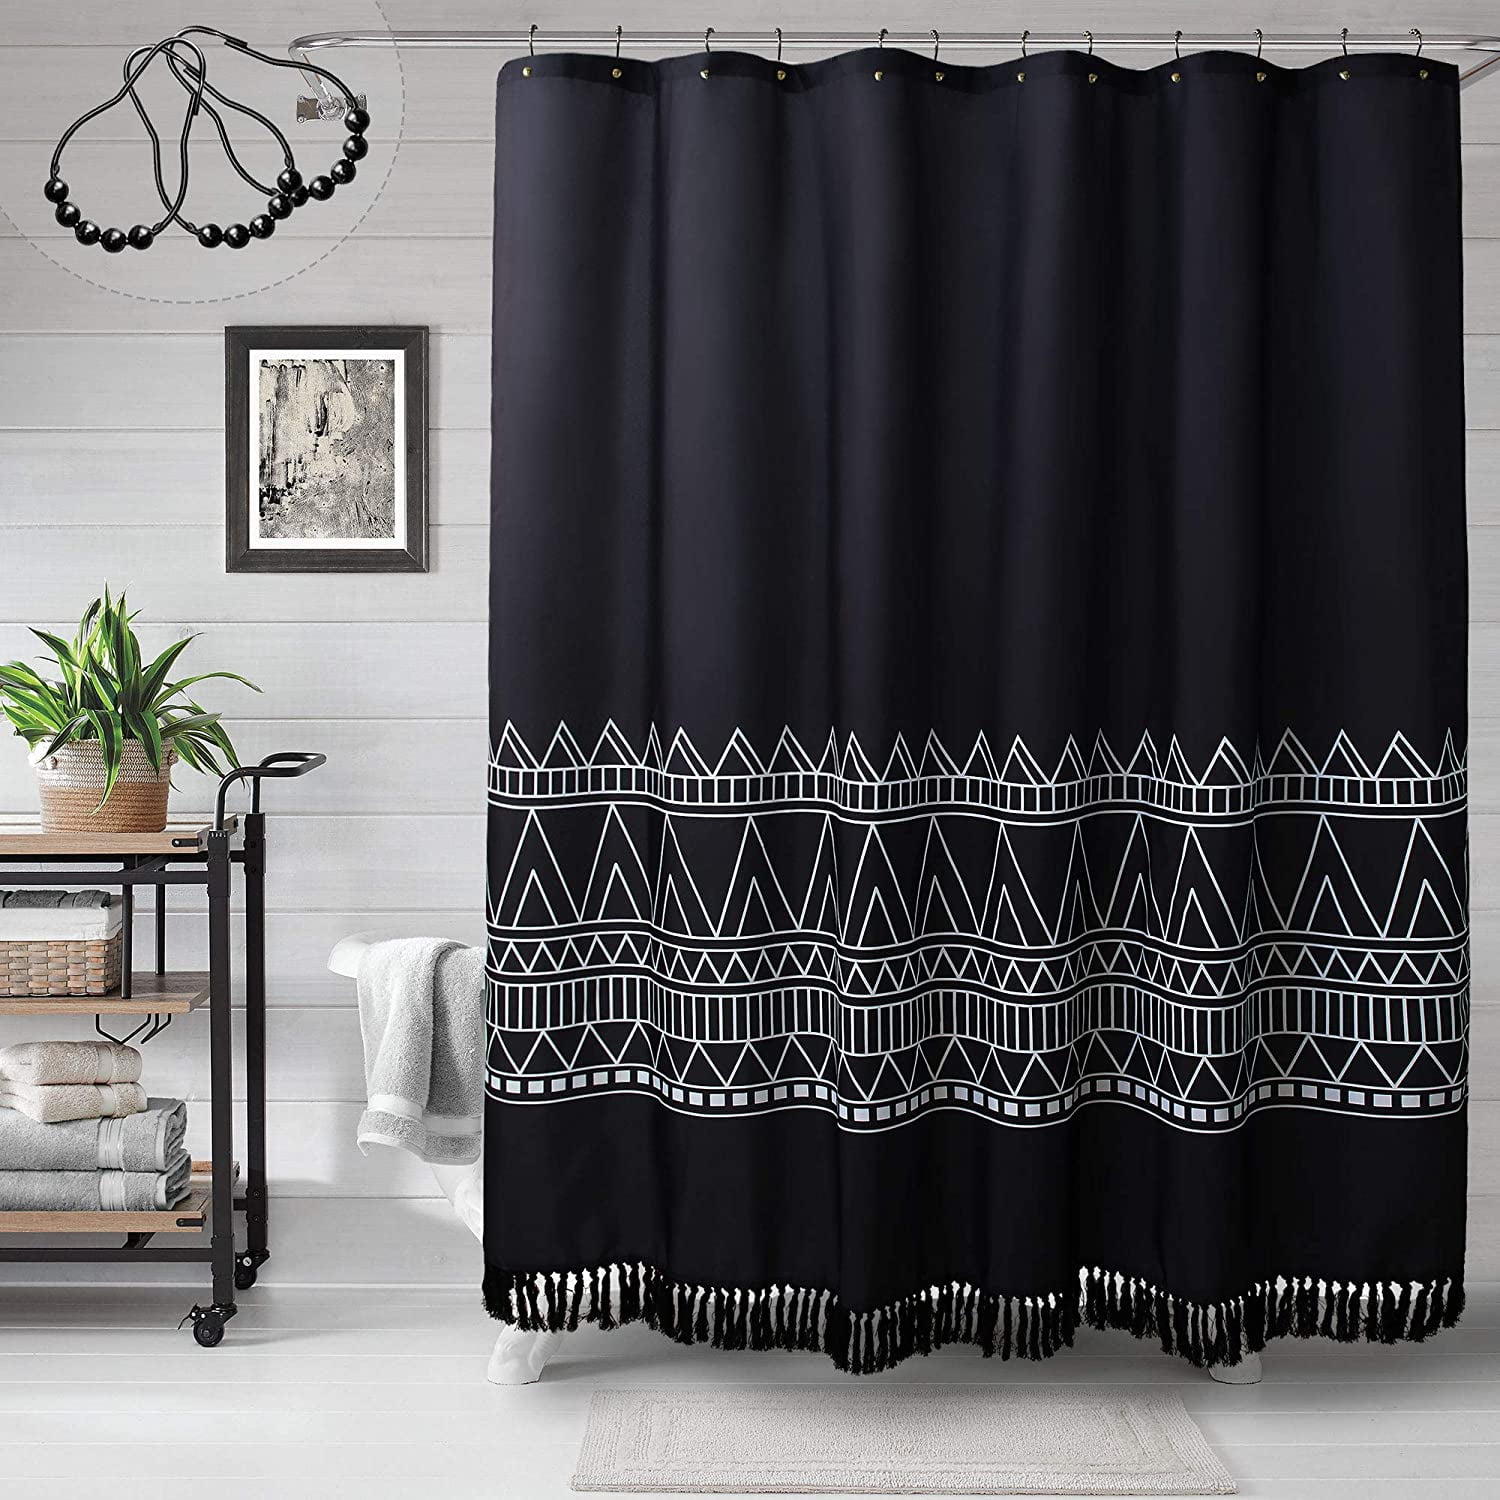 Waterproof Fabric Shower Curtain Set Black Background Abstract White Moustache 